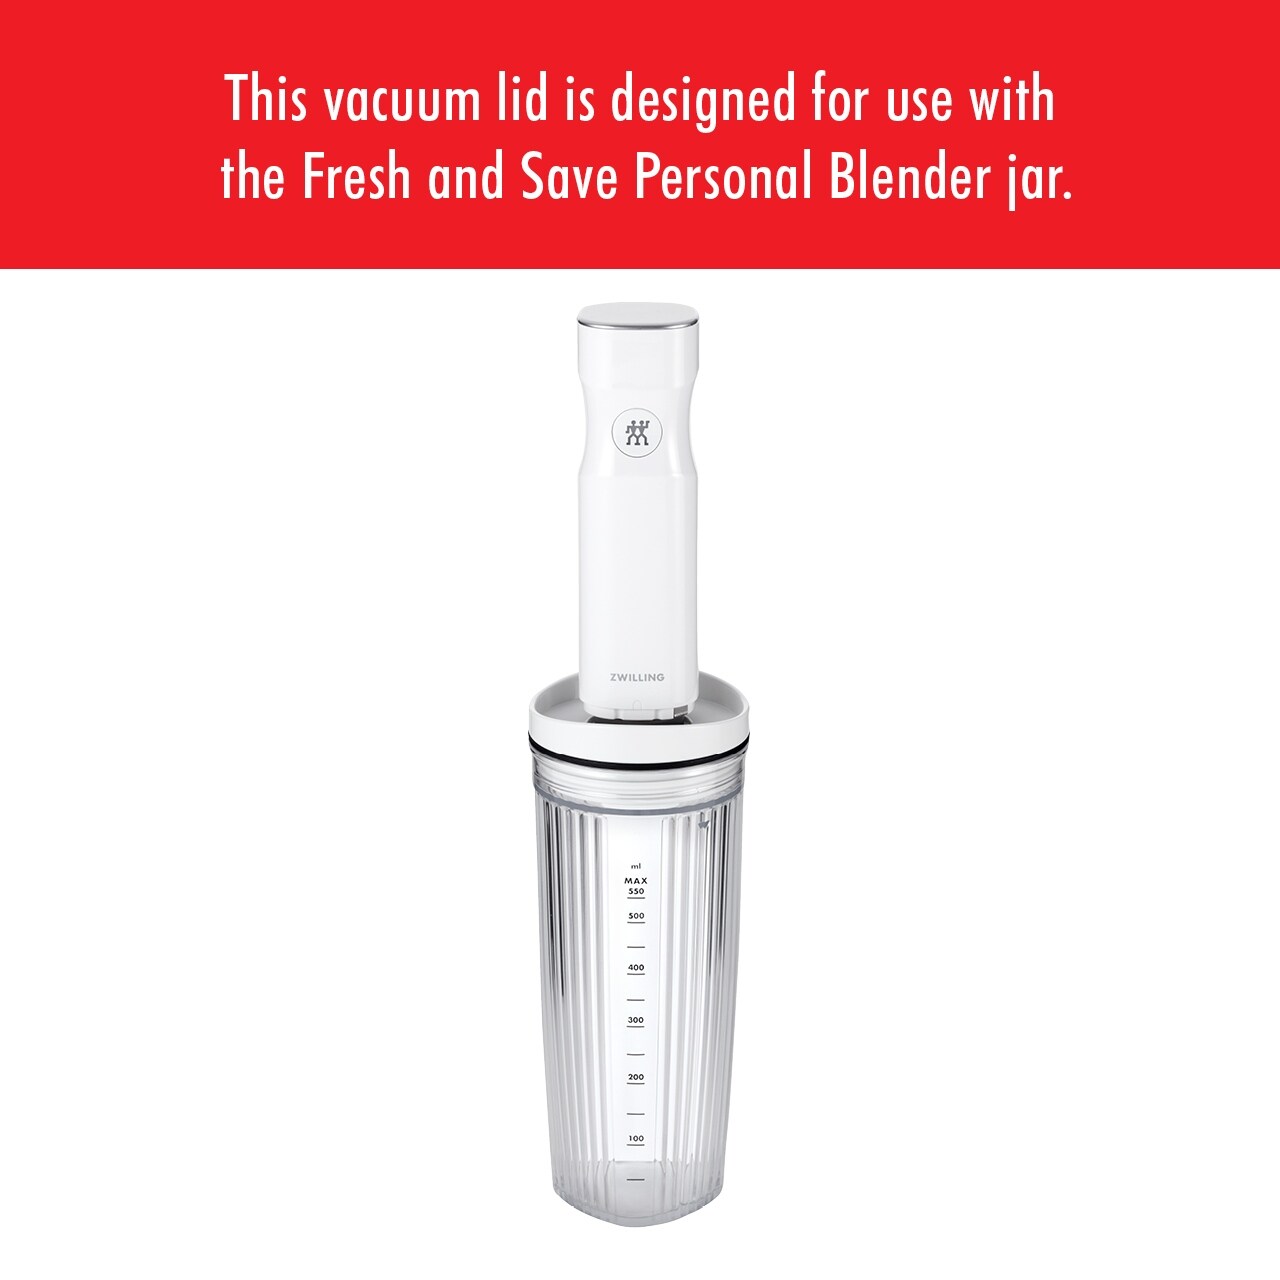 https://ak1.ostkcdn.com/images/products/is/images/direct/f0909a17e1100faf230d26dfdeb810ff1d05e898/ZWILLING-Enfinigy-Vacuum-Lid-for-Personal-Blender-Jar.jpg